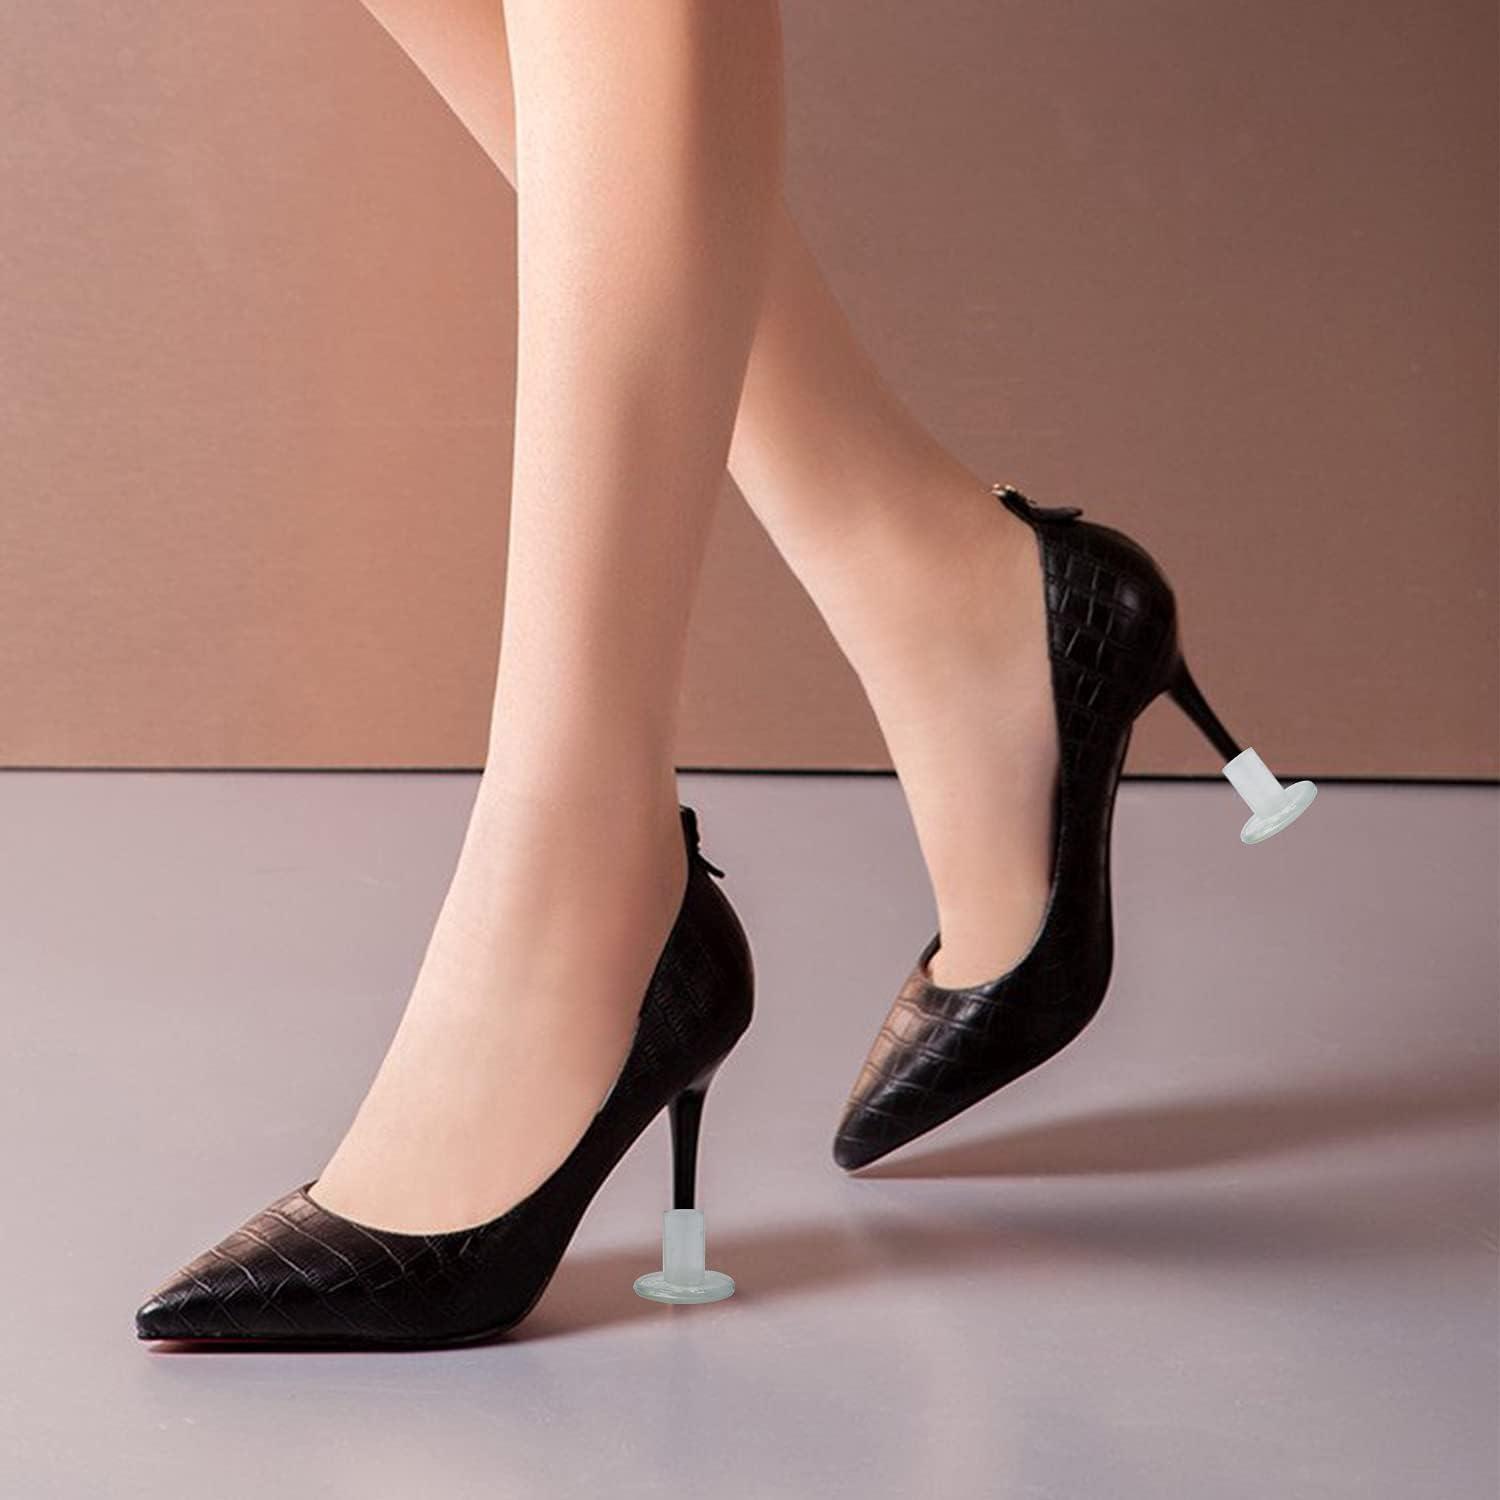 31 32 33 Small Size High Heels Female Stiletto Black Professional French  Soft Leather Low Heels 41-43 Large Size Single size 41 Color Nude color heel  height 4cm